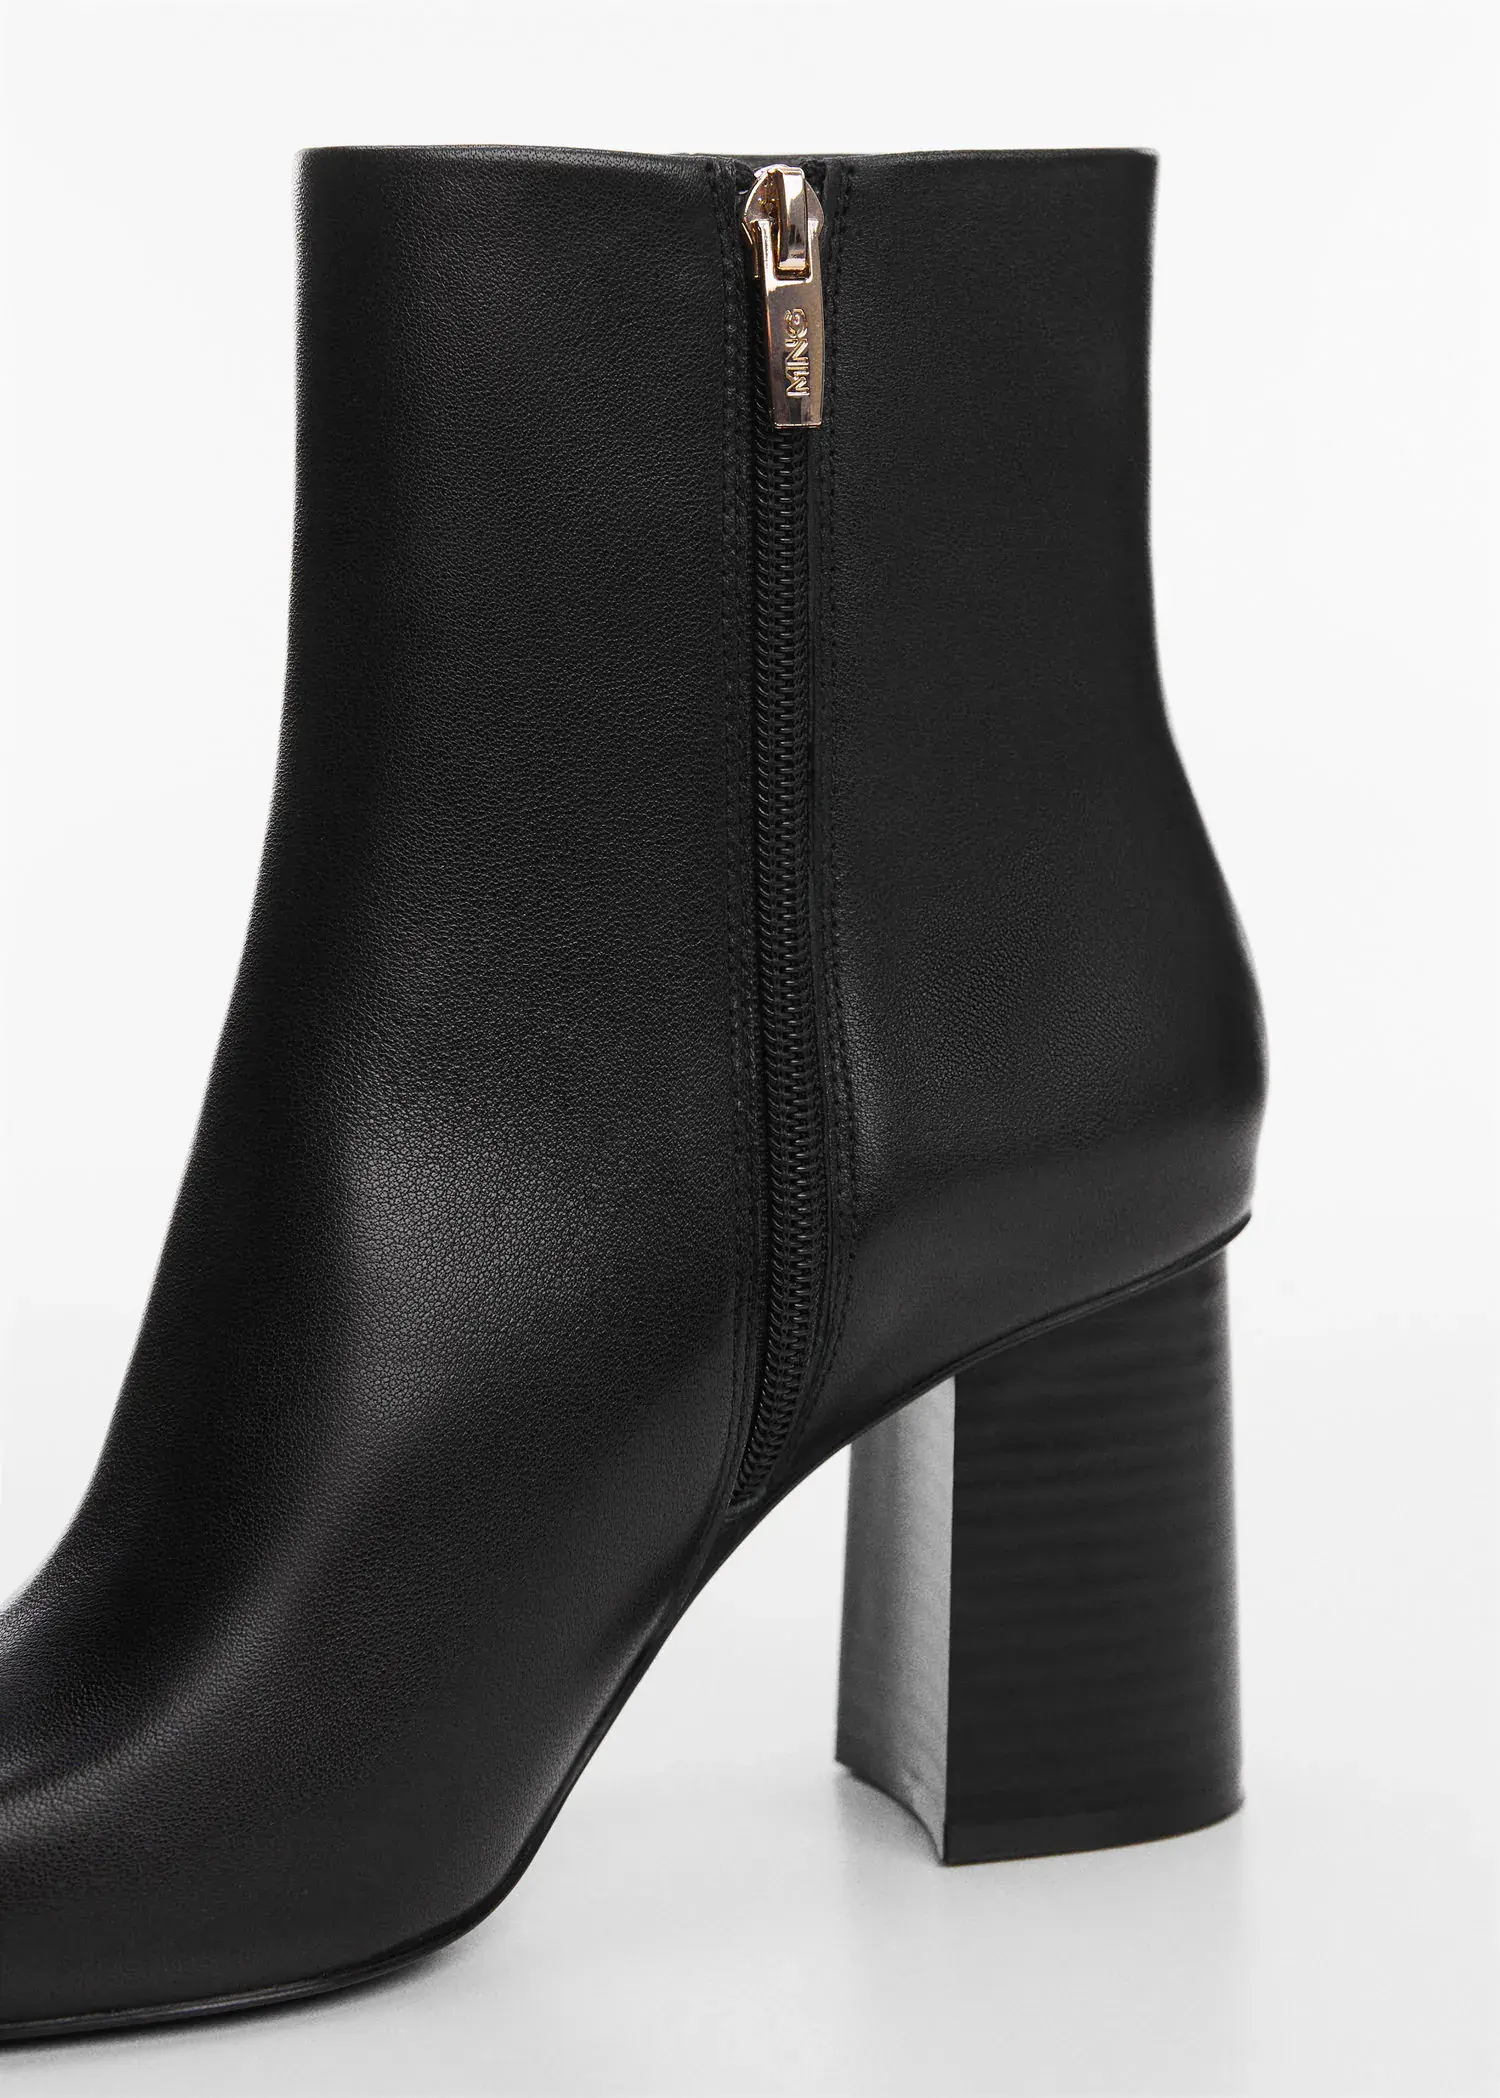 Mango Squared toe leather ankle boots. 3